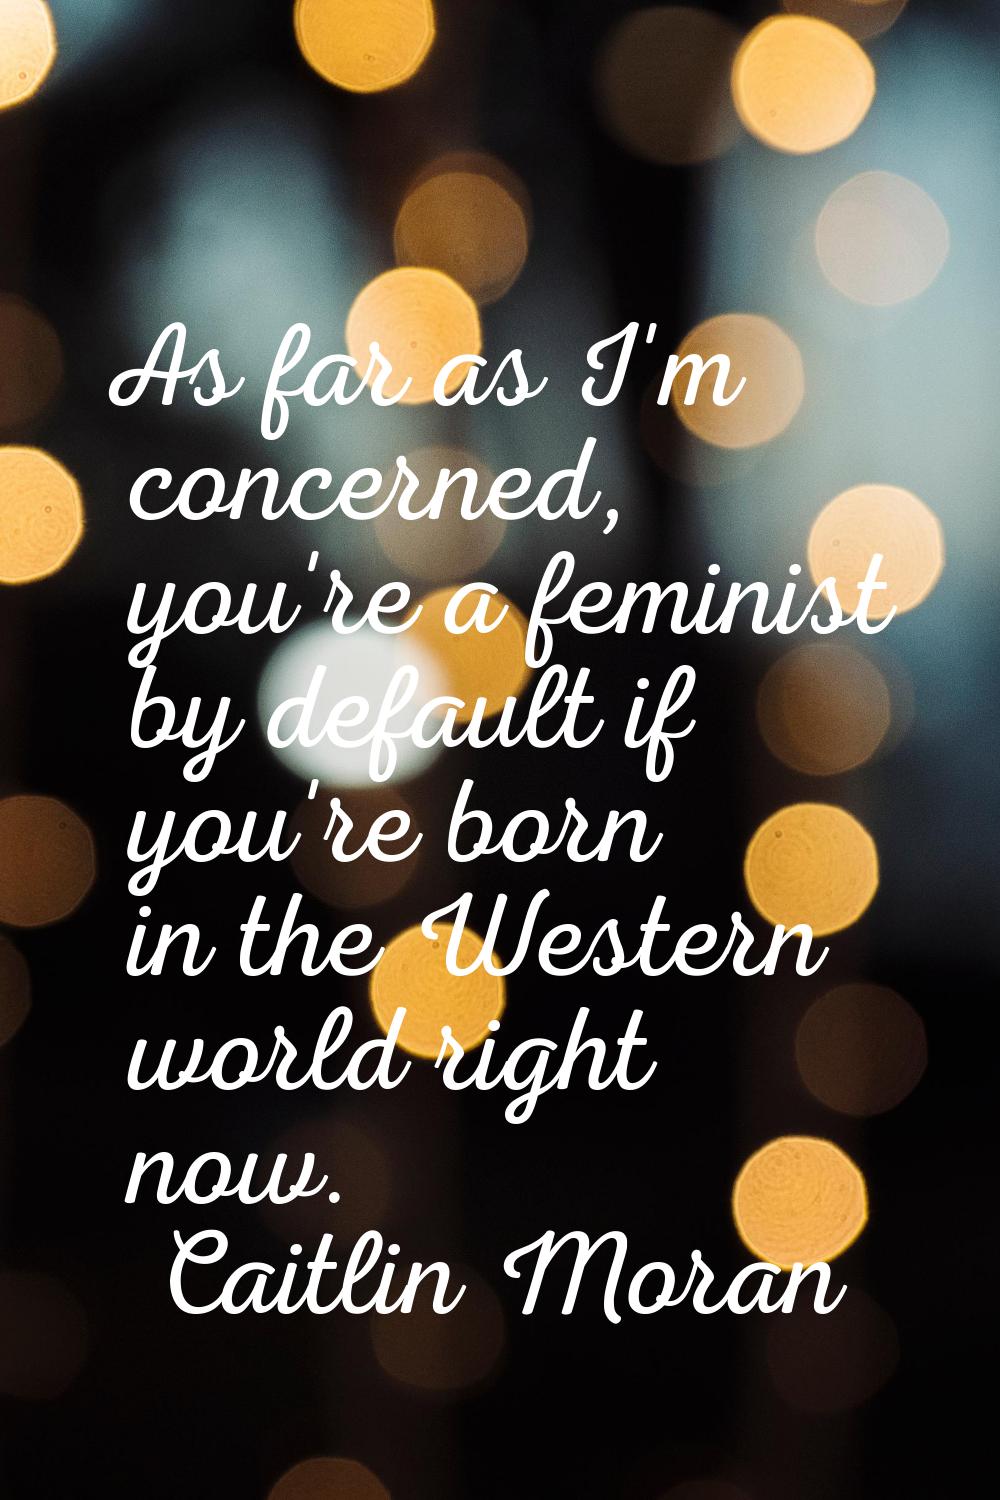 As far as I'm concerned, you're a feminist by default if you're born in the Western world right now